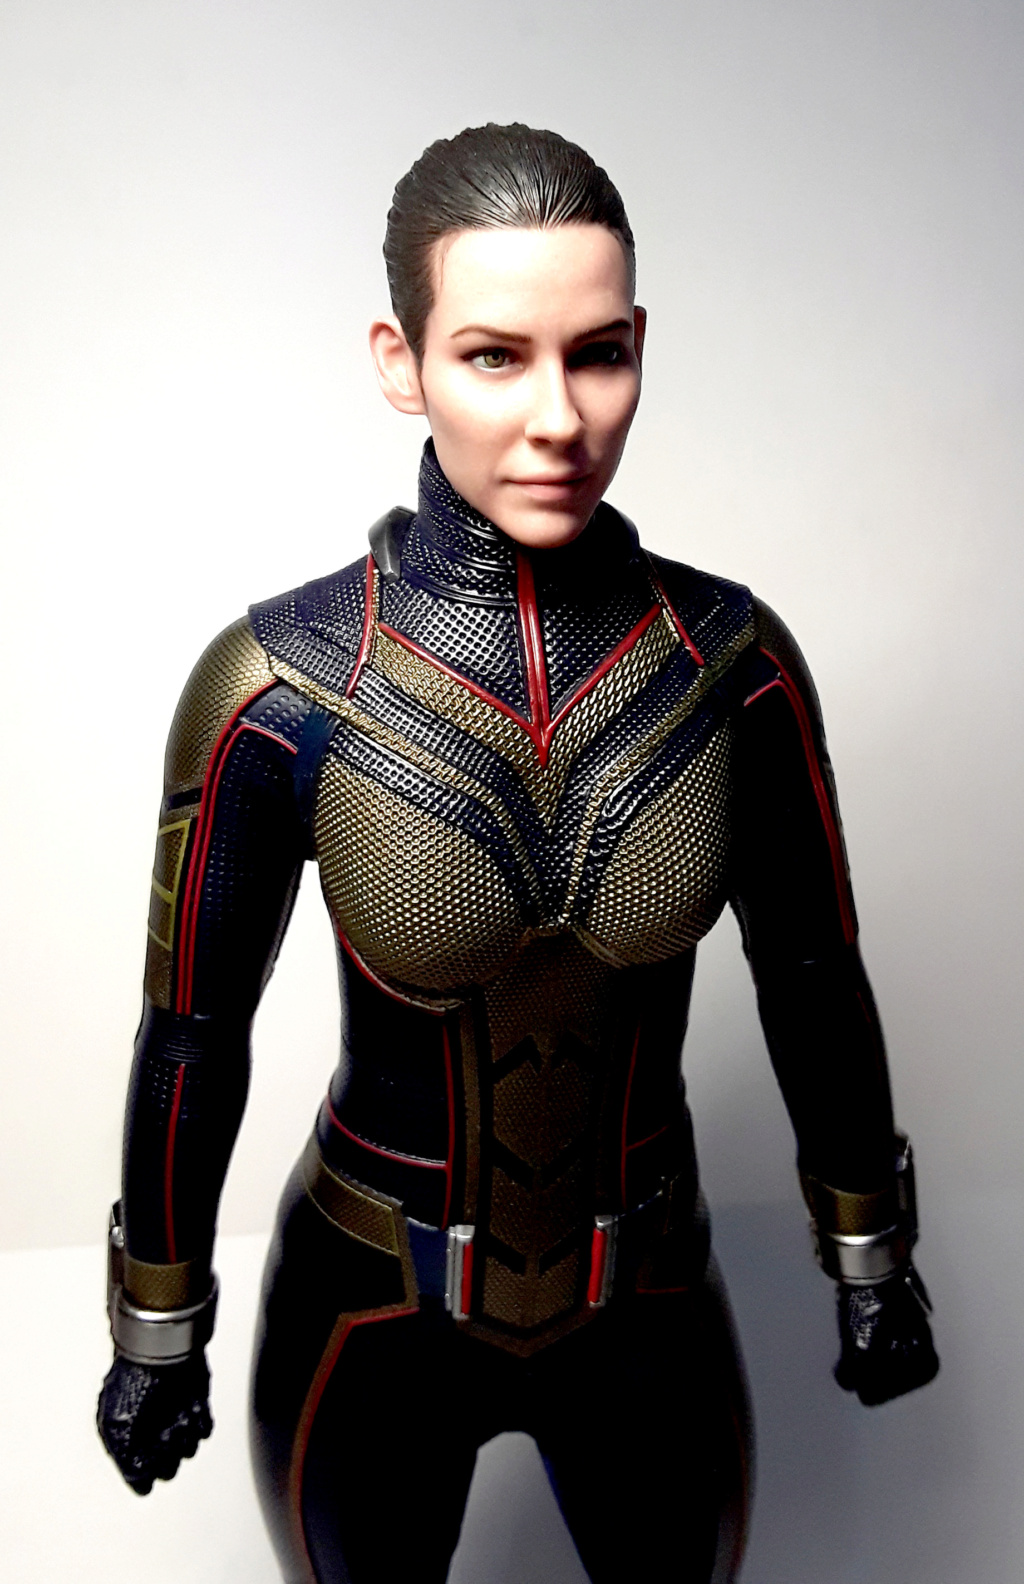 Ant-ManAndTheWasp - NEW PRODUCT: HOT TOYS: ANT-MAN AND THE WASP - THE WASP 1/6 COLLECTIBLE FIGURE (Full Details UP) Wasp_110